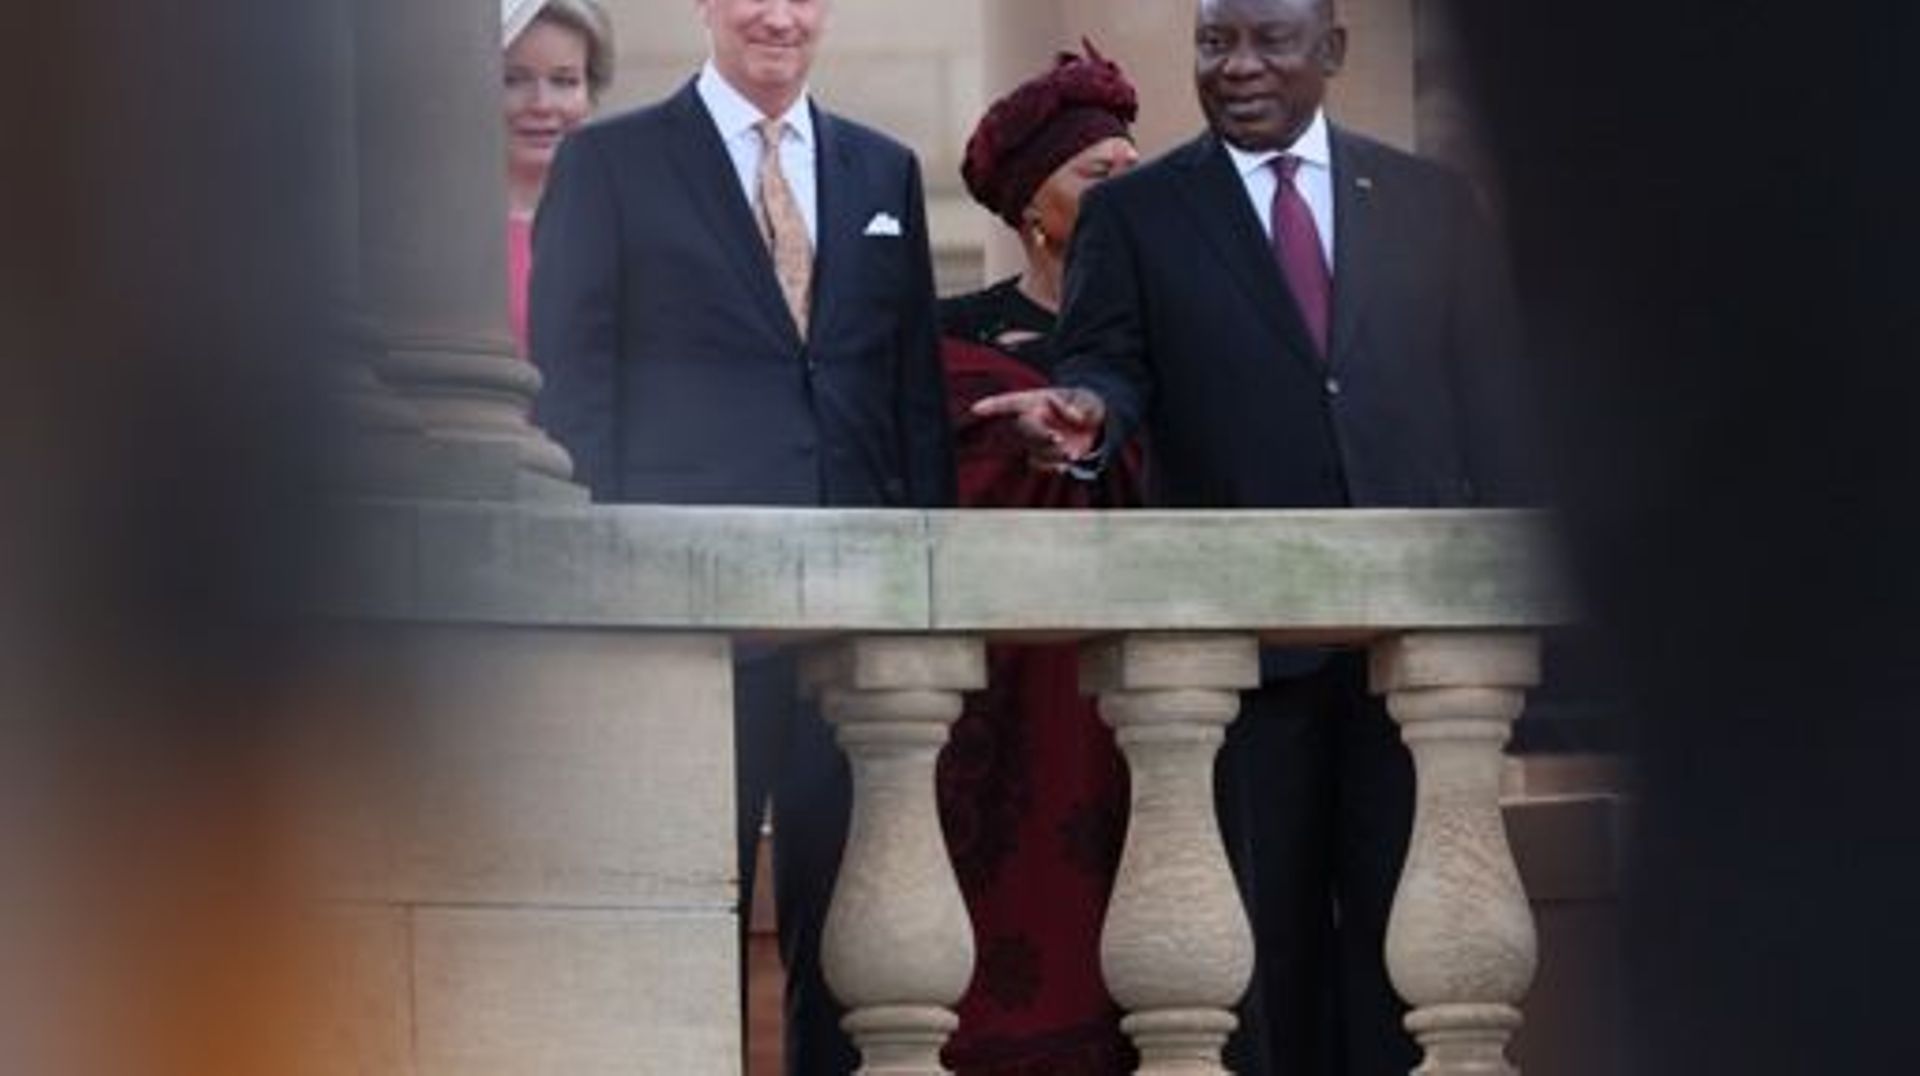 Queen Mathilde of Belgium, King Philippe - Filip of Belgium and South Africa President Cyril Ramaphosa pictured at the official welcome ceremony at the Union Buildings, the official seat of the South-African government, in Pretoria, during a state visit o